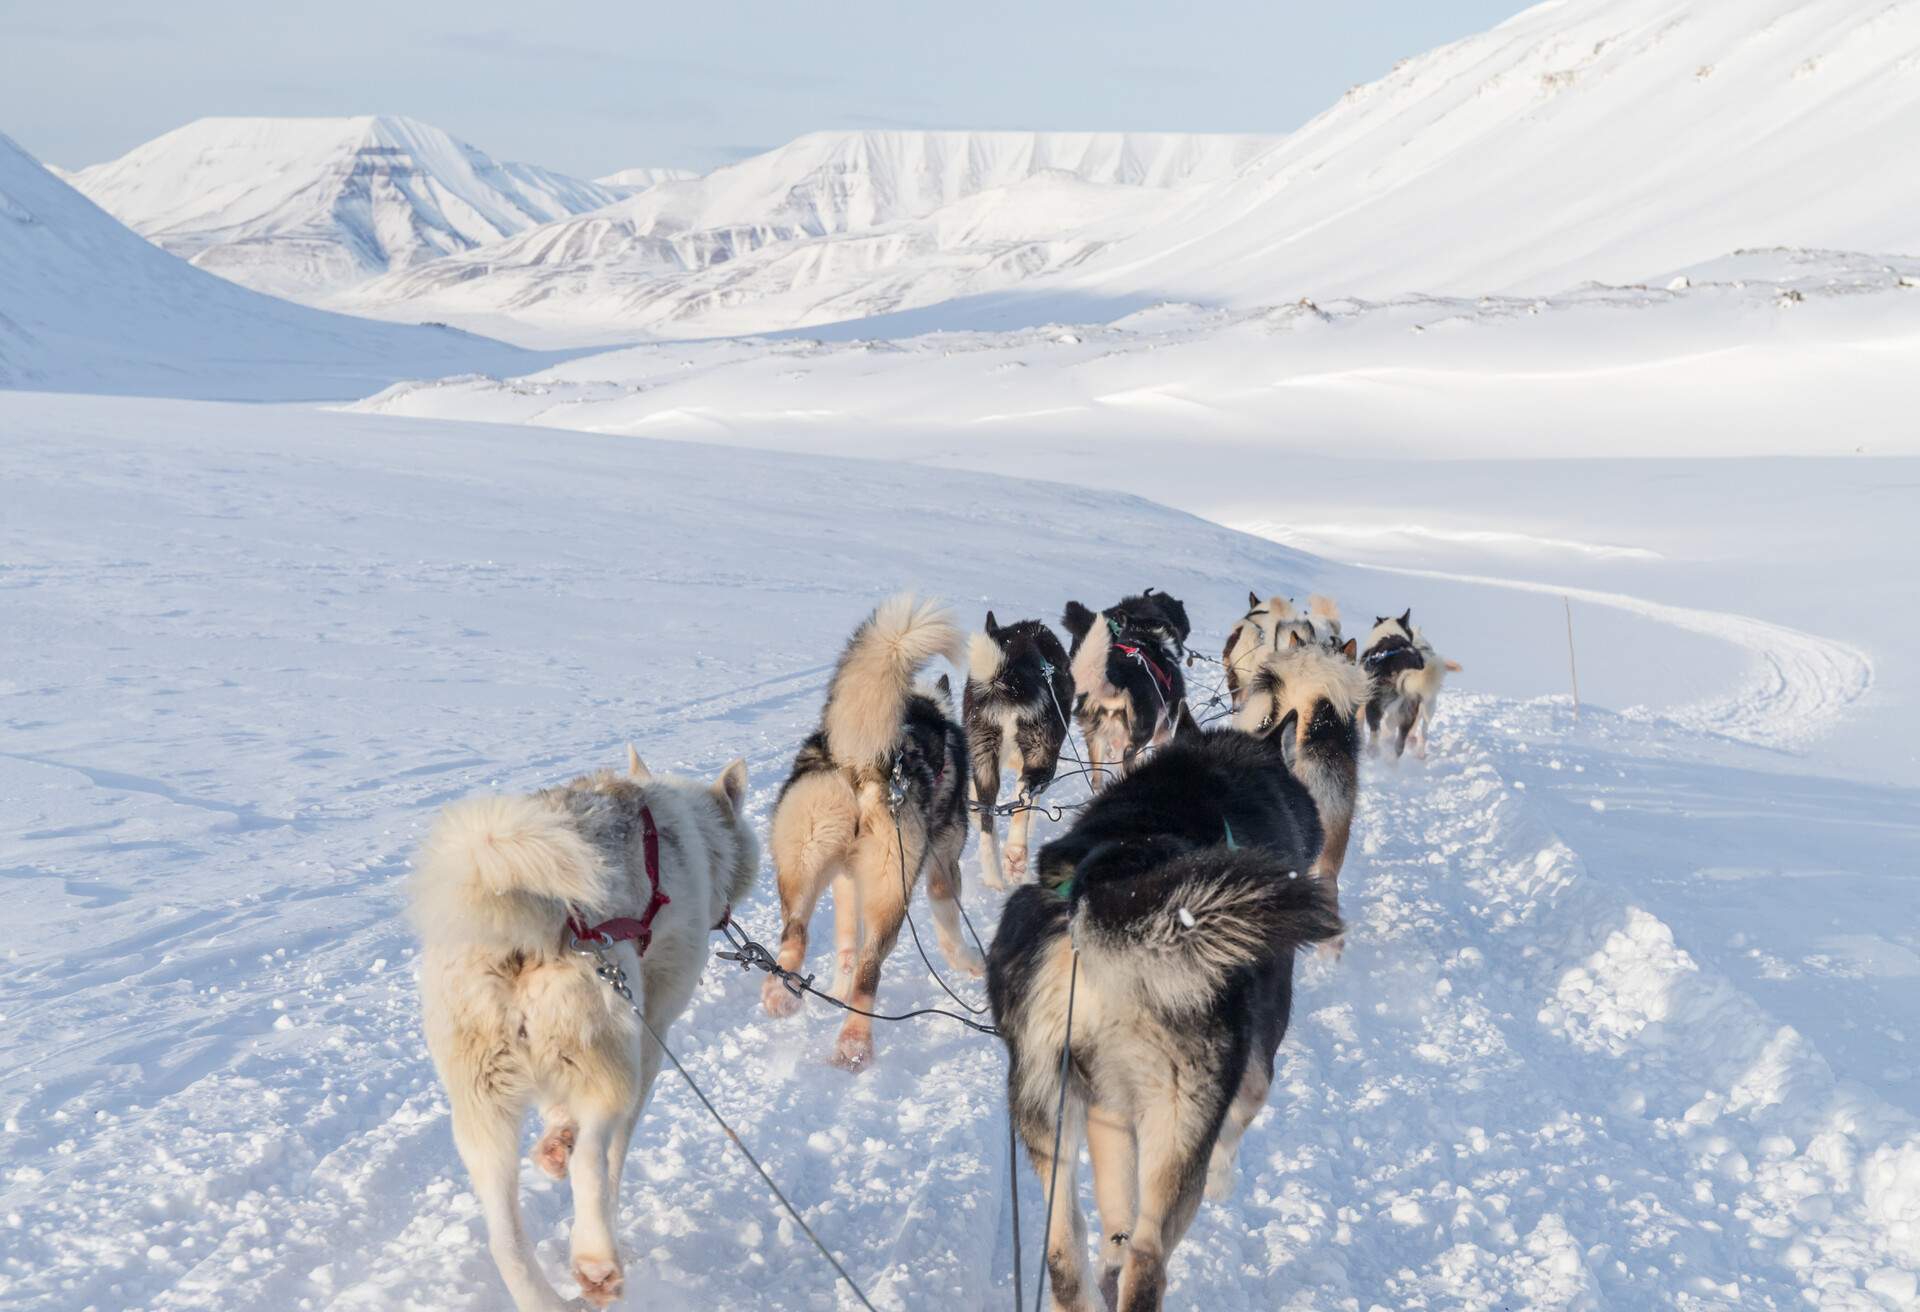 A team of strong and determined sledge dogs pulling a sled through a snowy landscape, showcasing their power and endurance in the wintry wilderness.